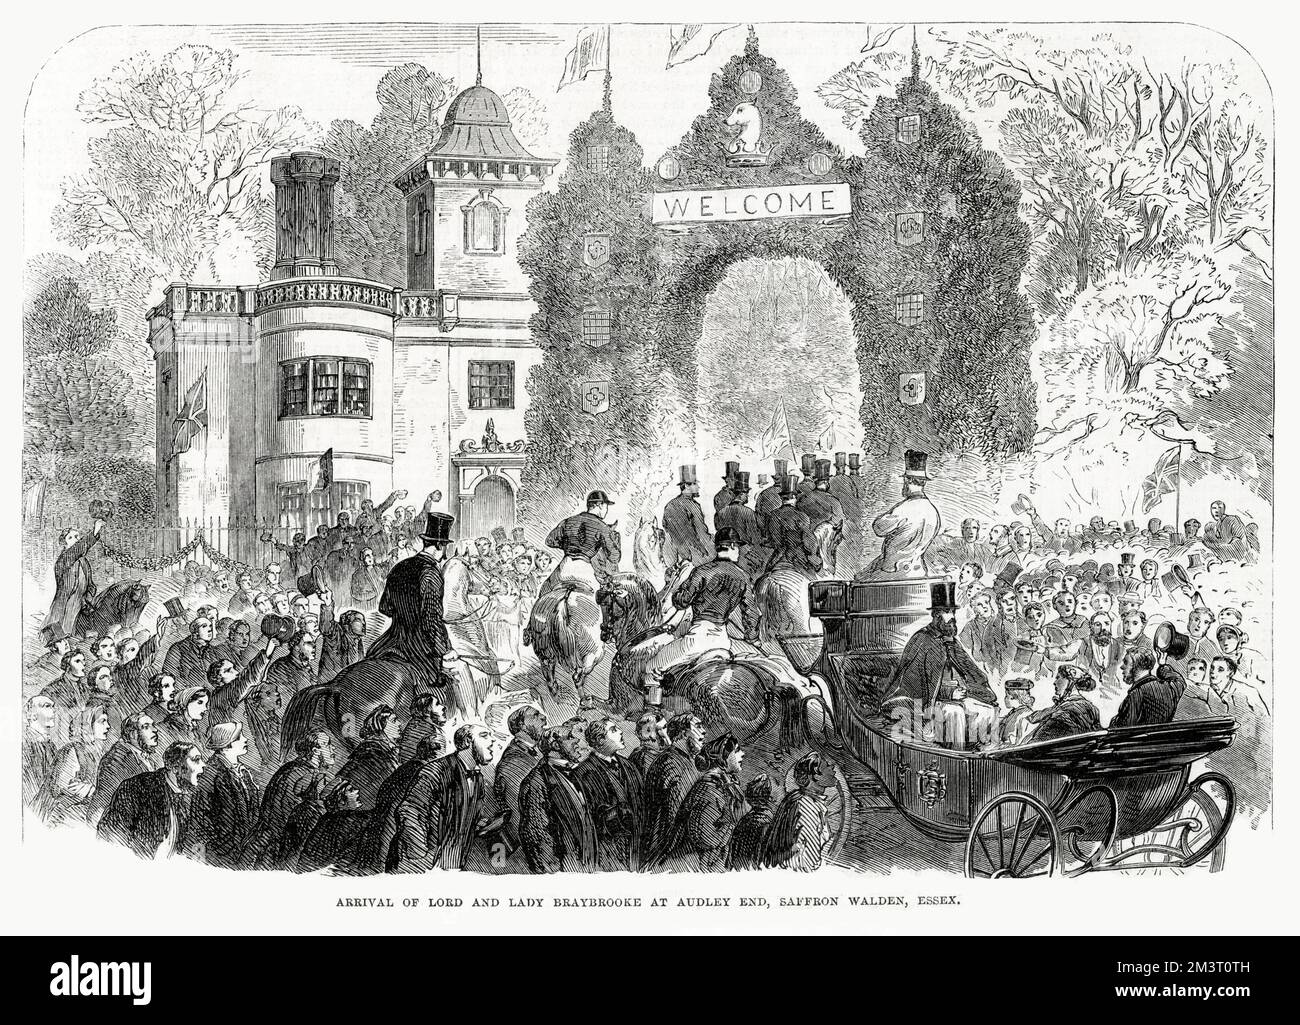 The arrival of Lord and Lady Braybrooke at Audley End House. Stock Photo